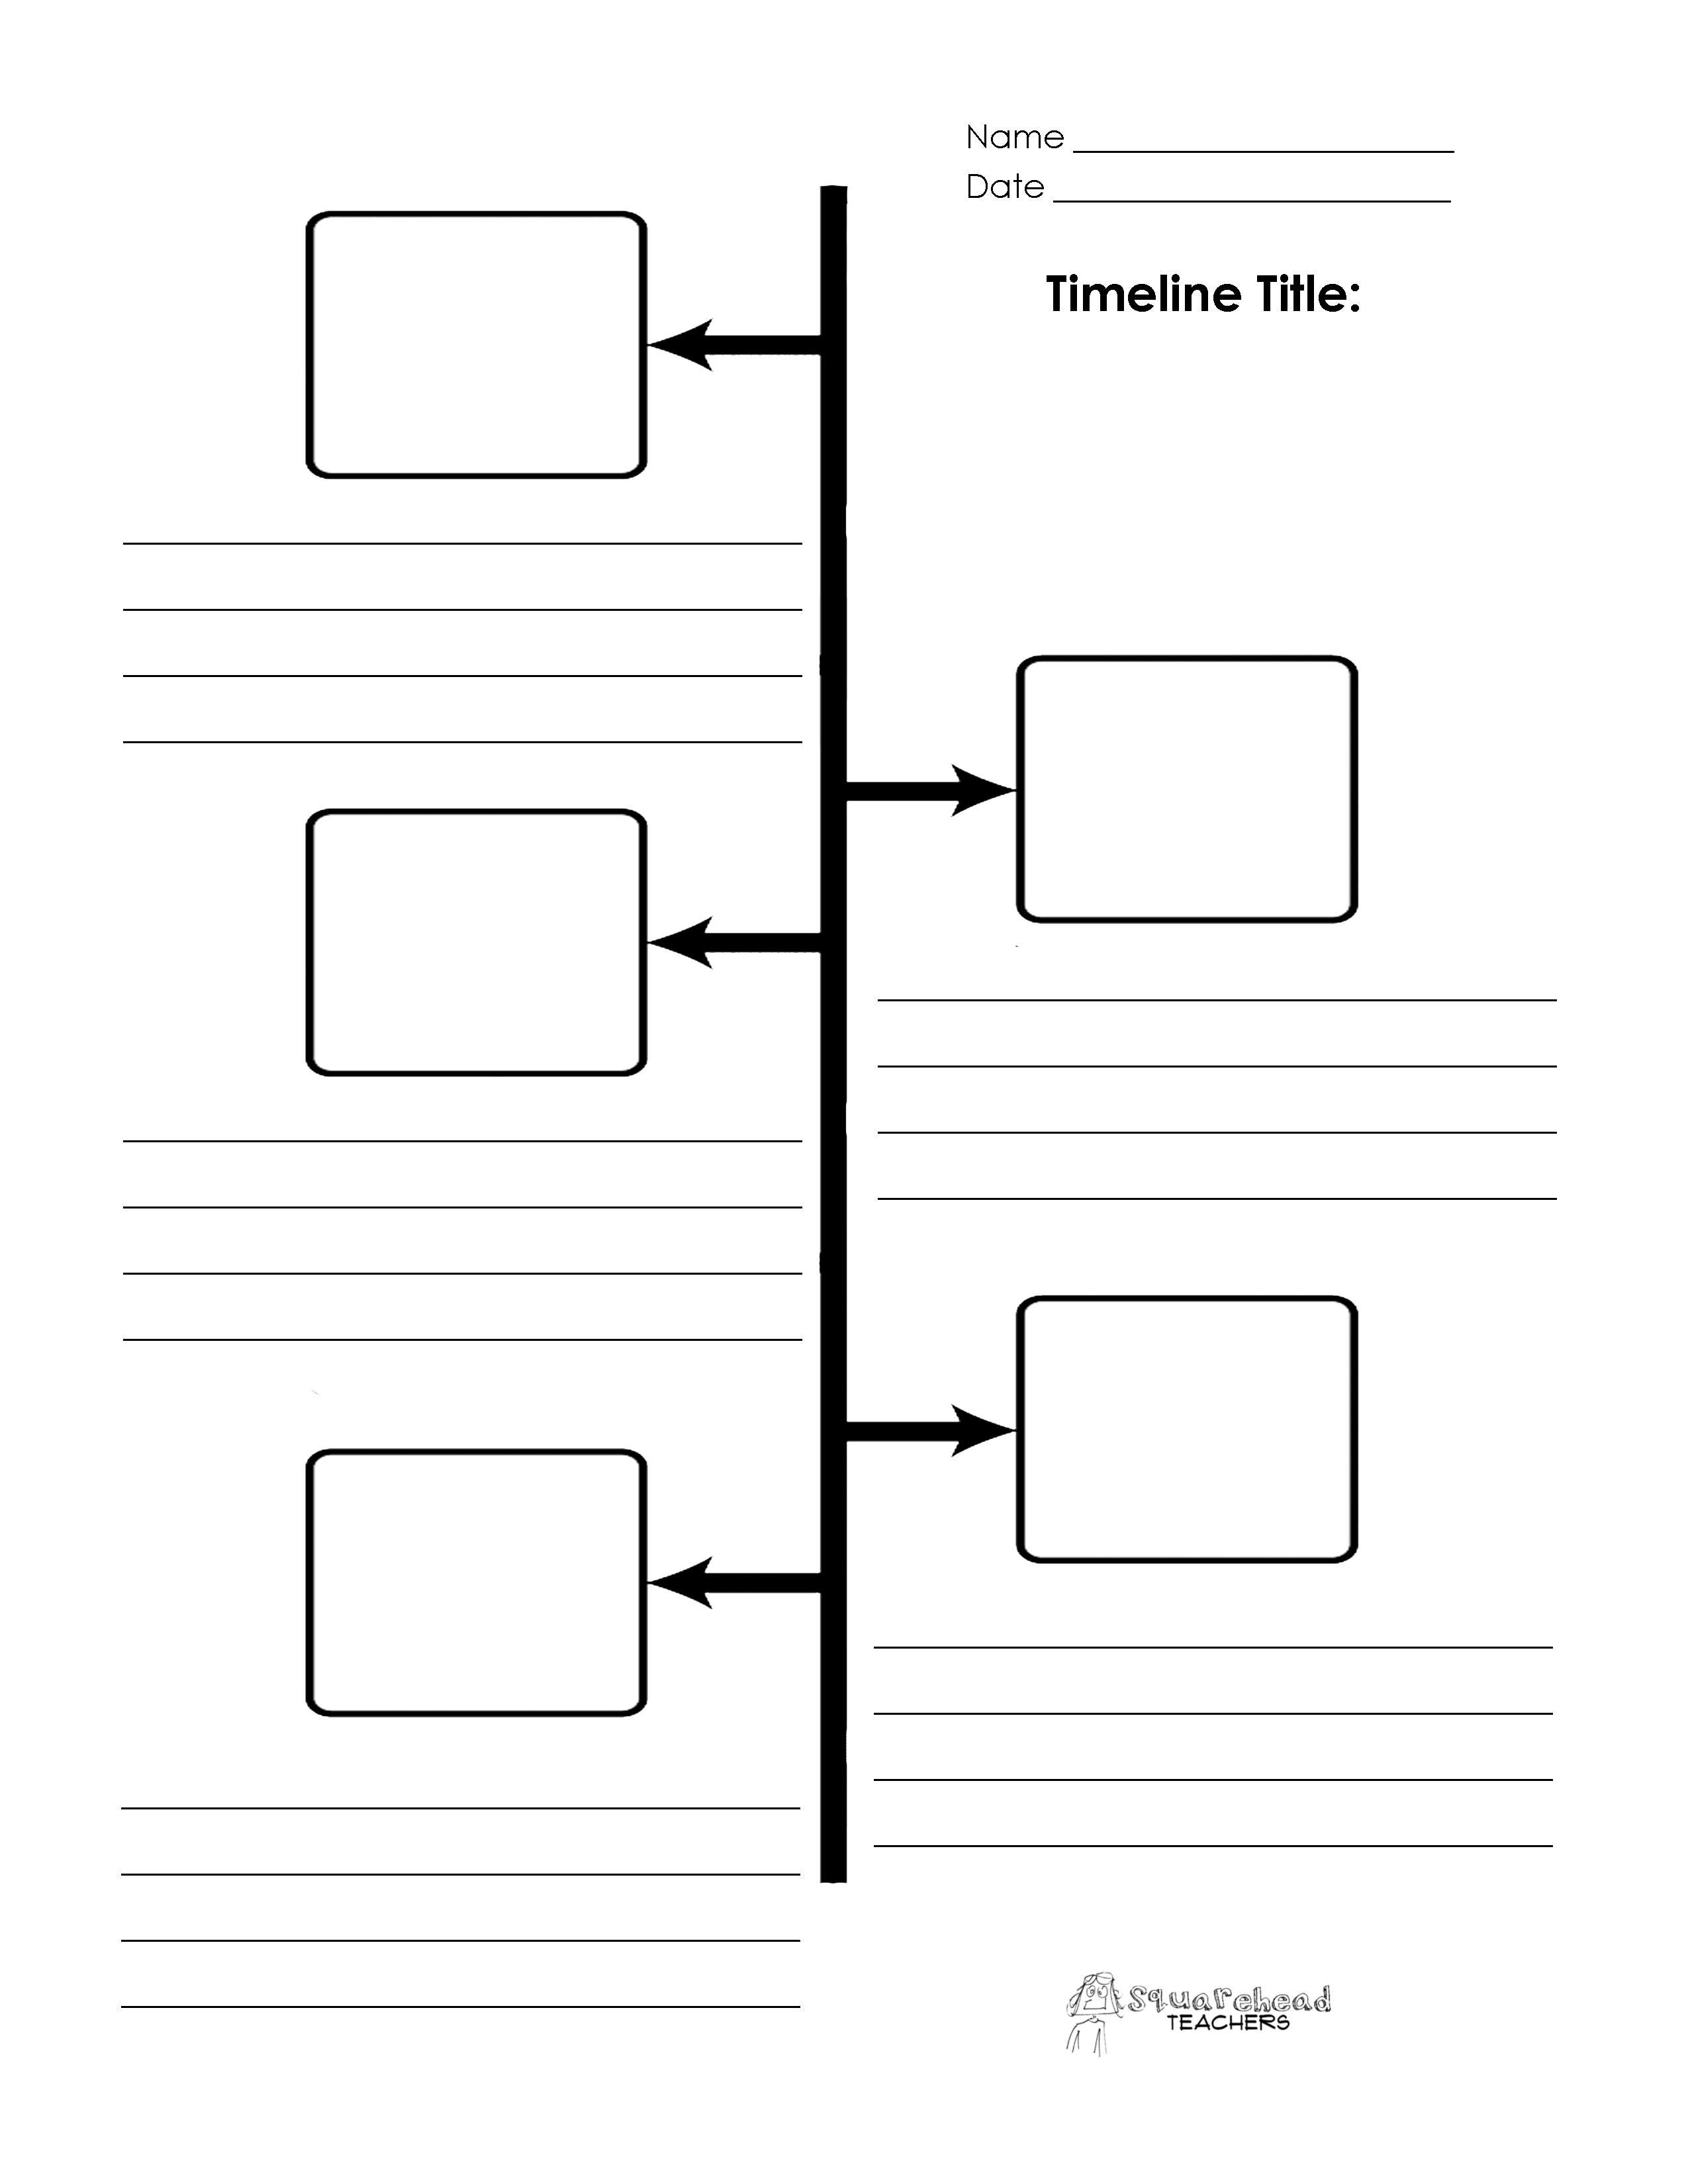 8-best-images-of-printable-blank-timelines-for-students-free